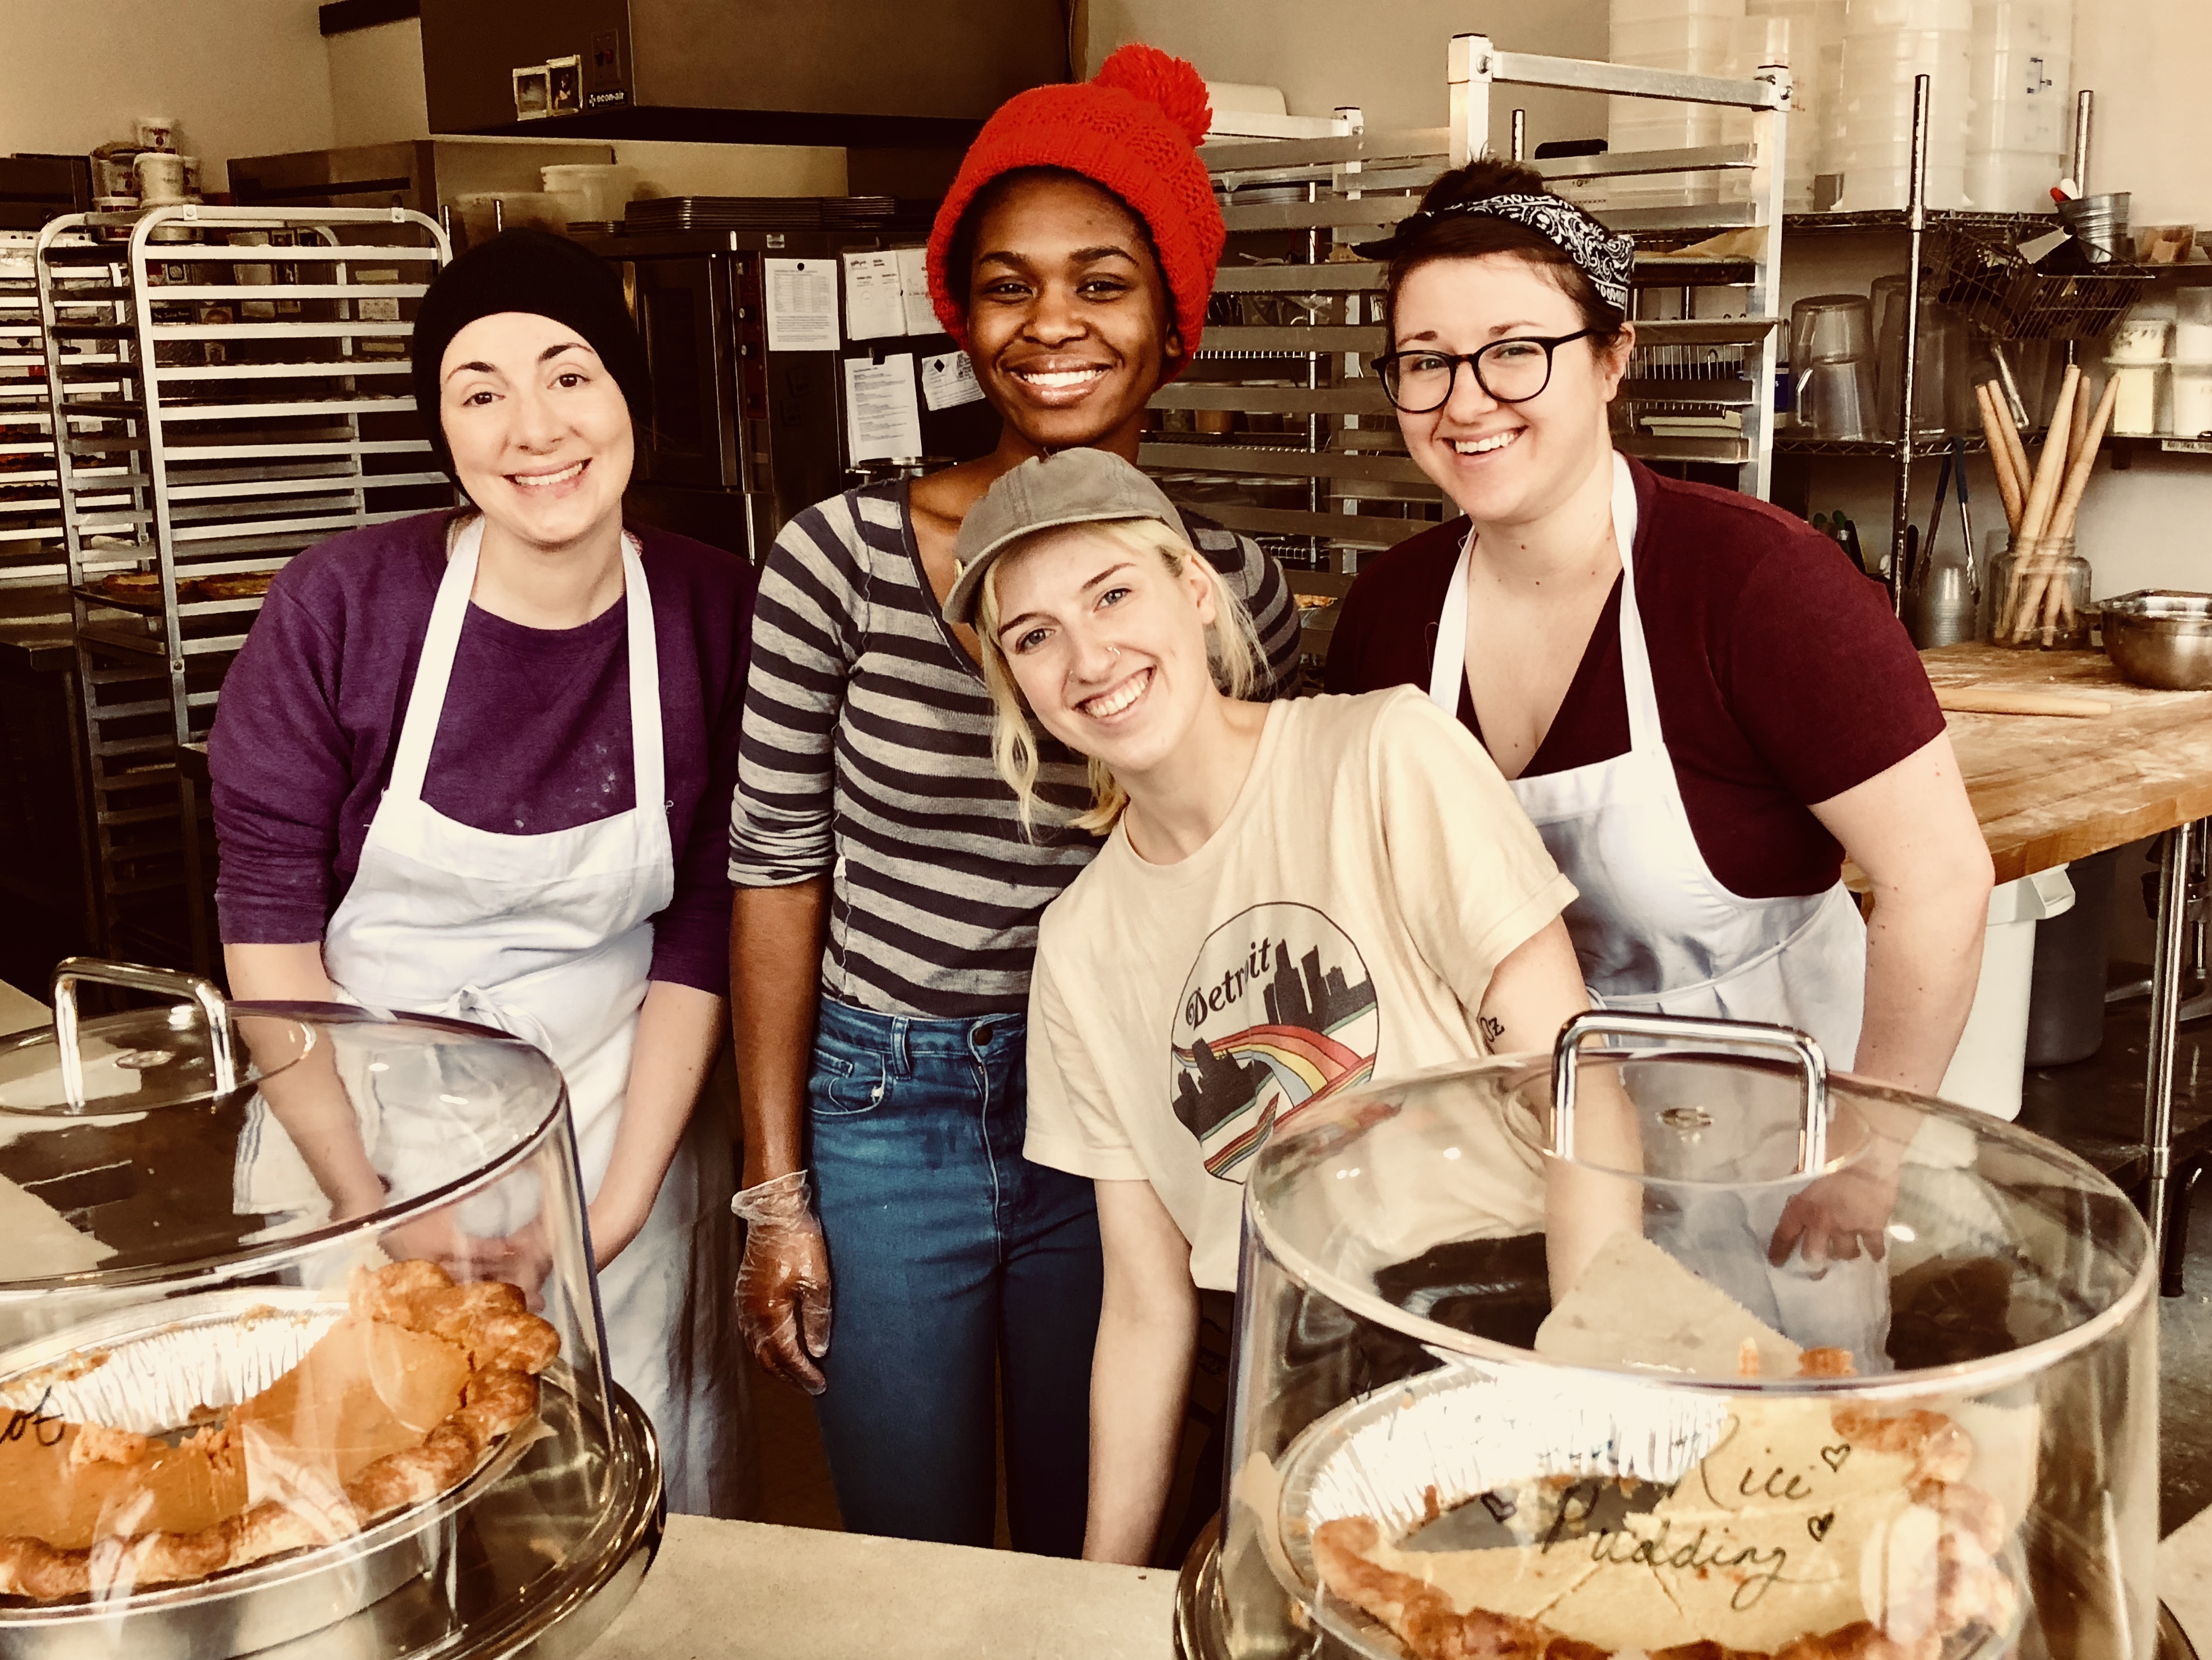 Bri Meilbeck (white t-shirt) and co-workers at Sister Pie bakery.